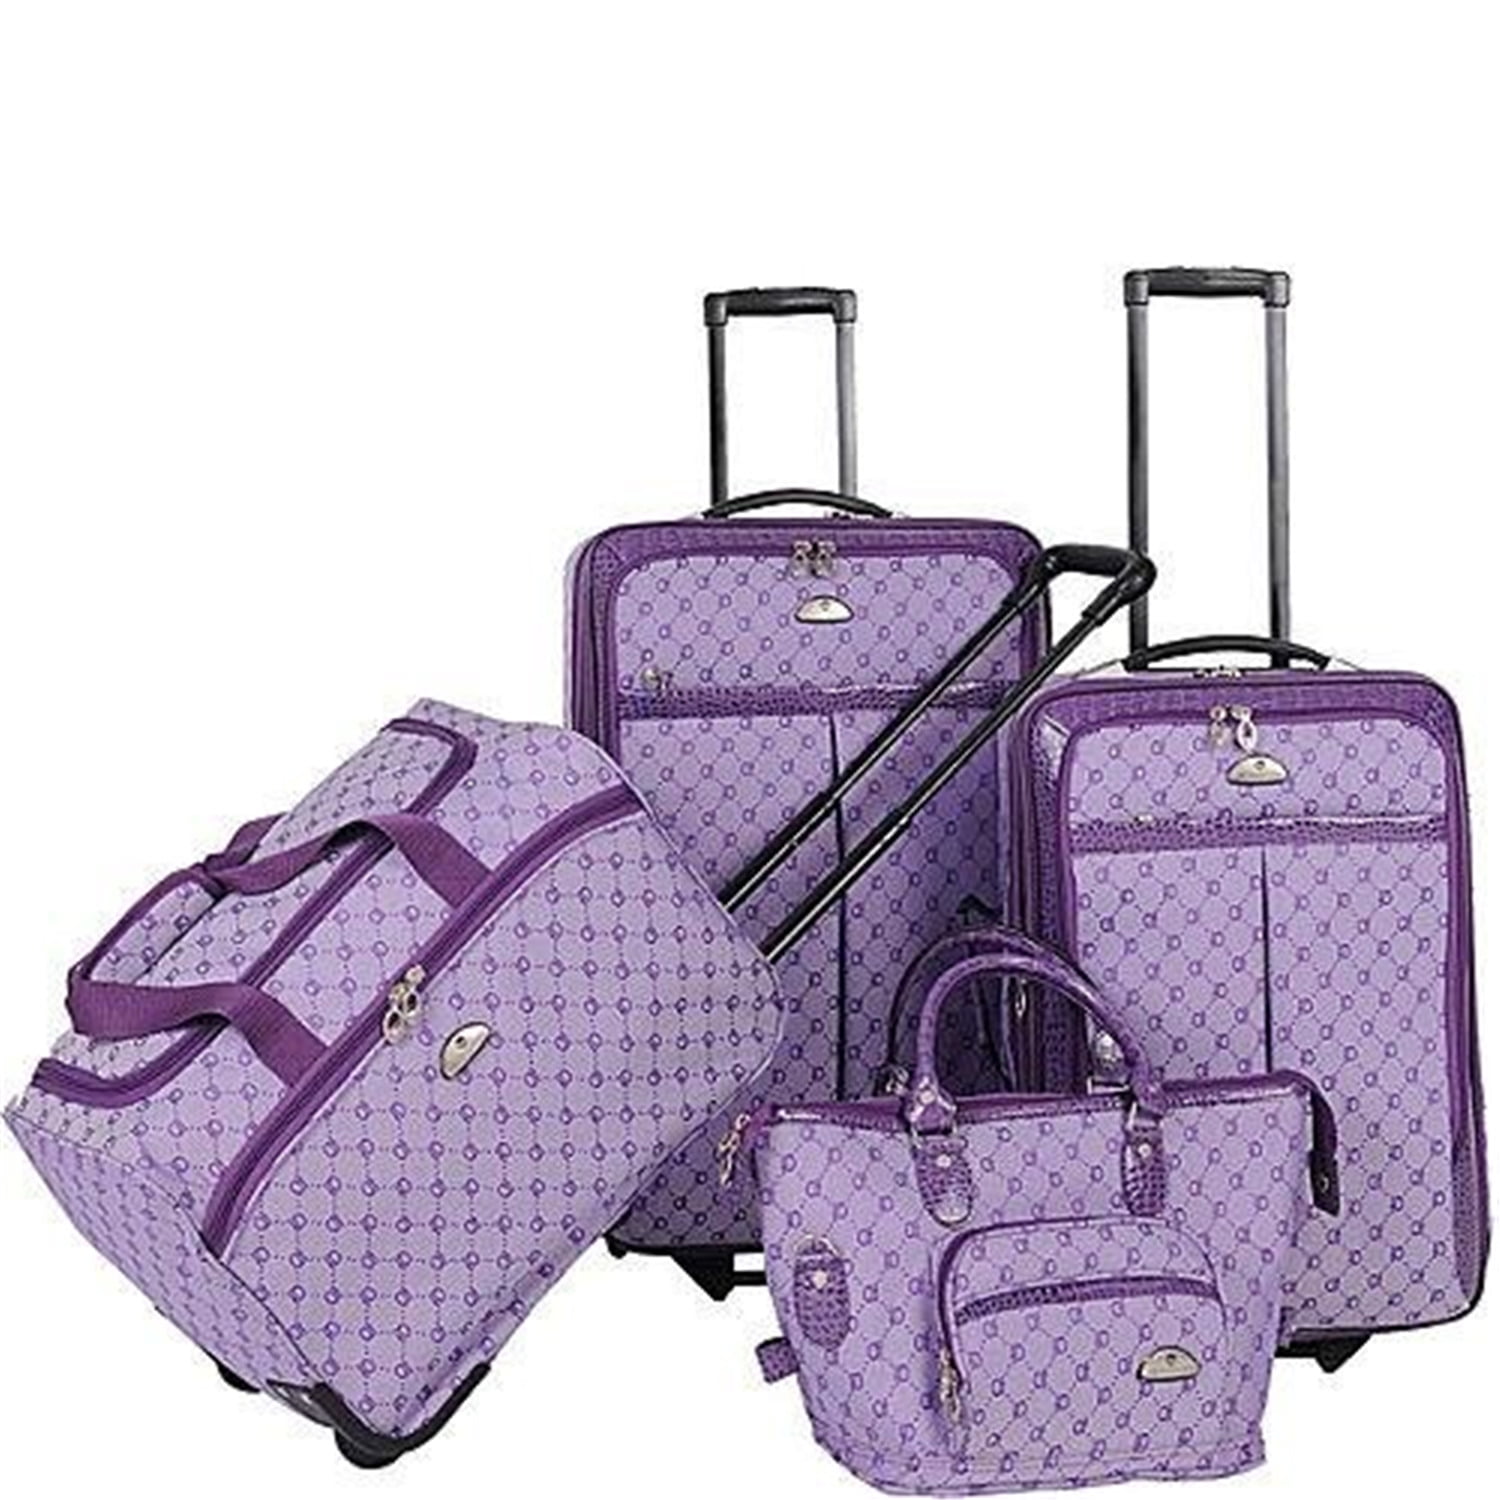 Picture of American Flyer 83700-4 LIP AF Signature Luggage Set, Purple - 4 Piece